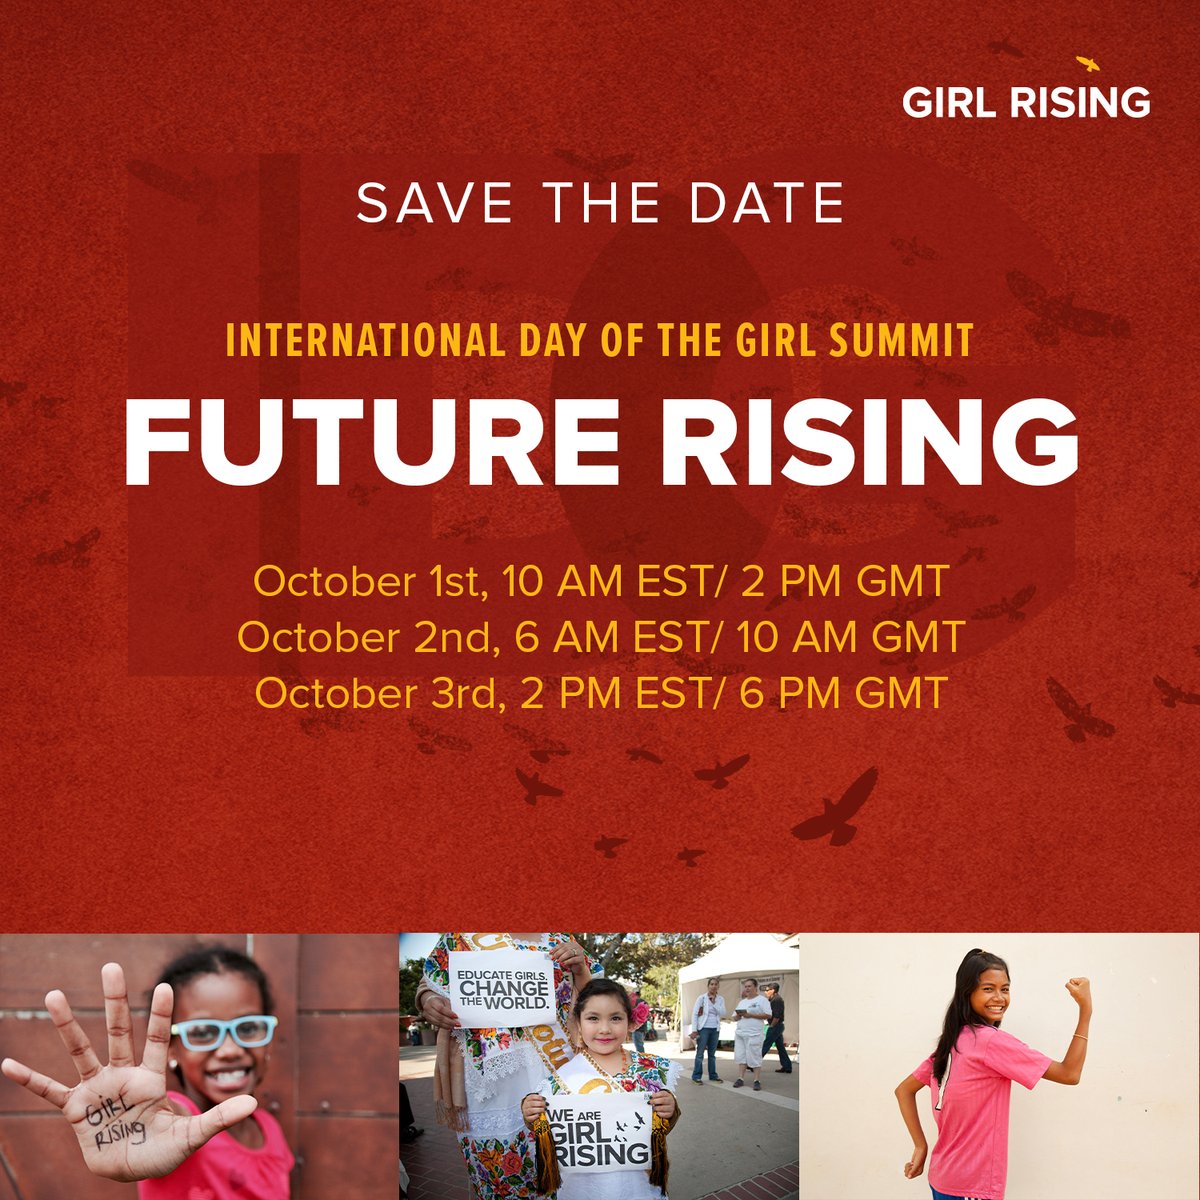 Save the Date to celebrate International Day of the Girl 2021 with Girl Rising! Join activists, experts, and girl champions from across the globe as we address critical issues facing girls and the actions that each of us can take to build a better future. #IDG2021 #IDG